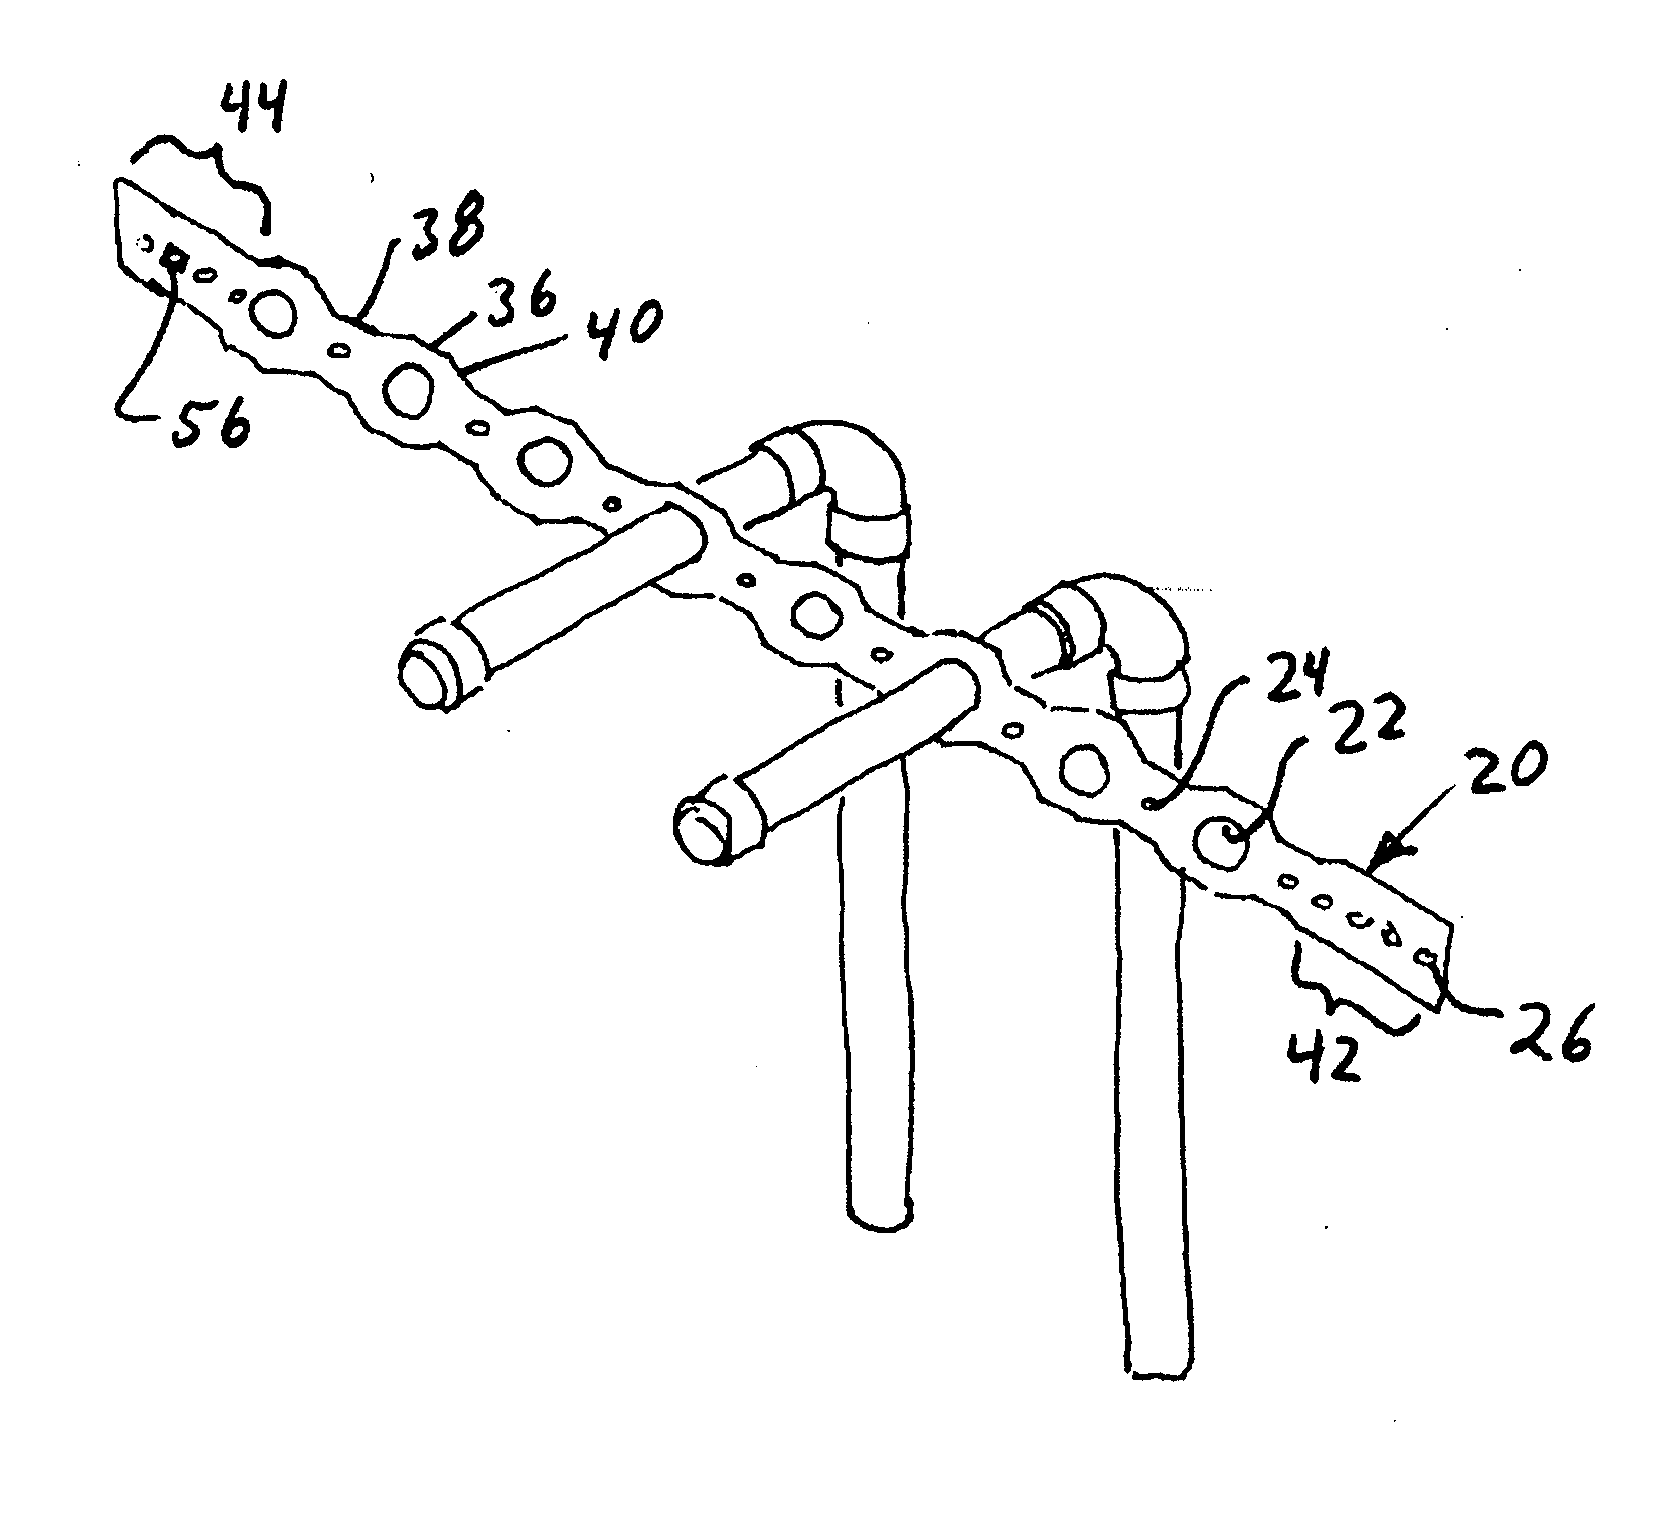 Pipe locator and support